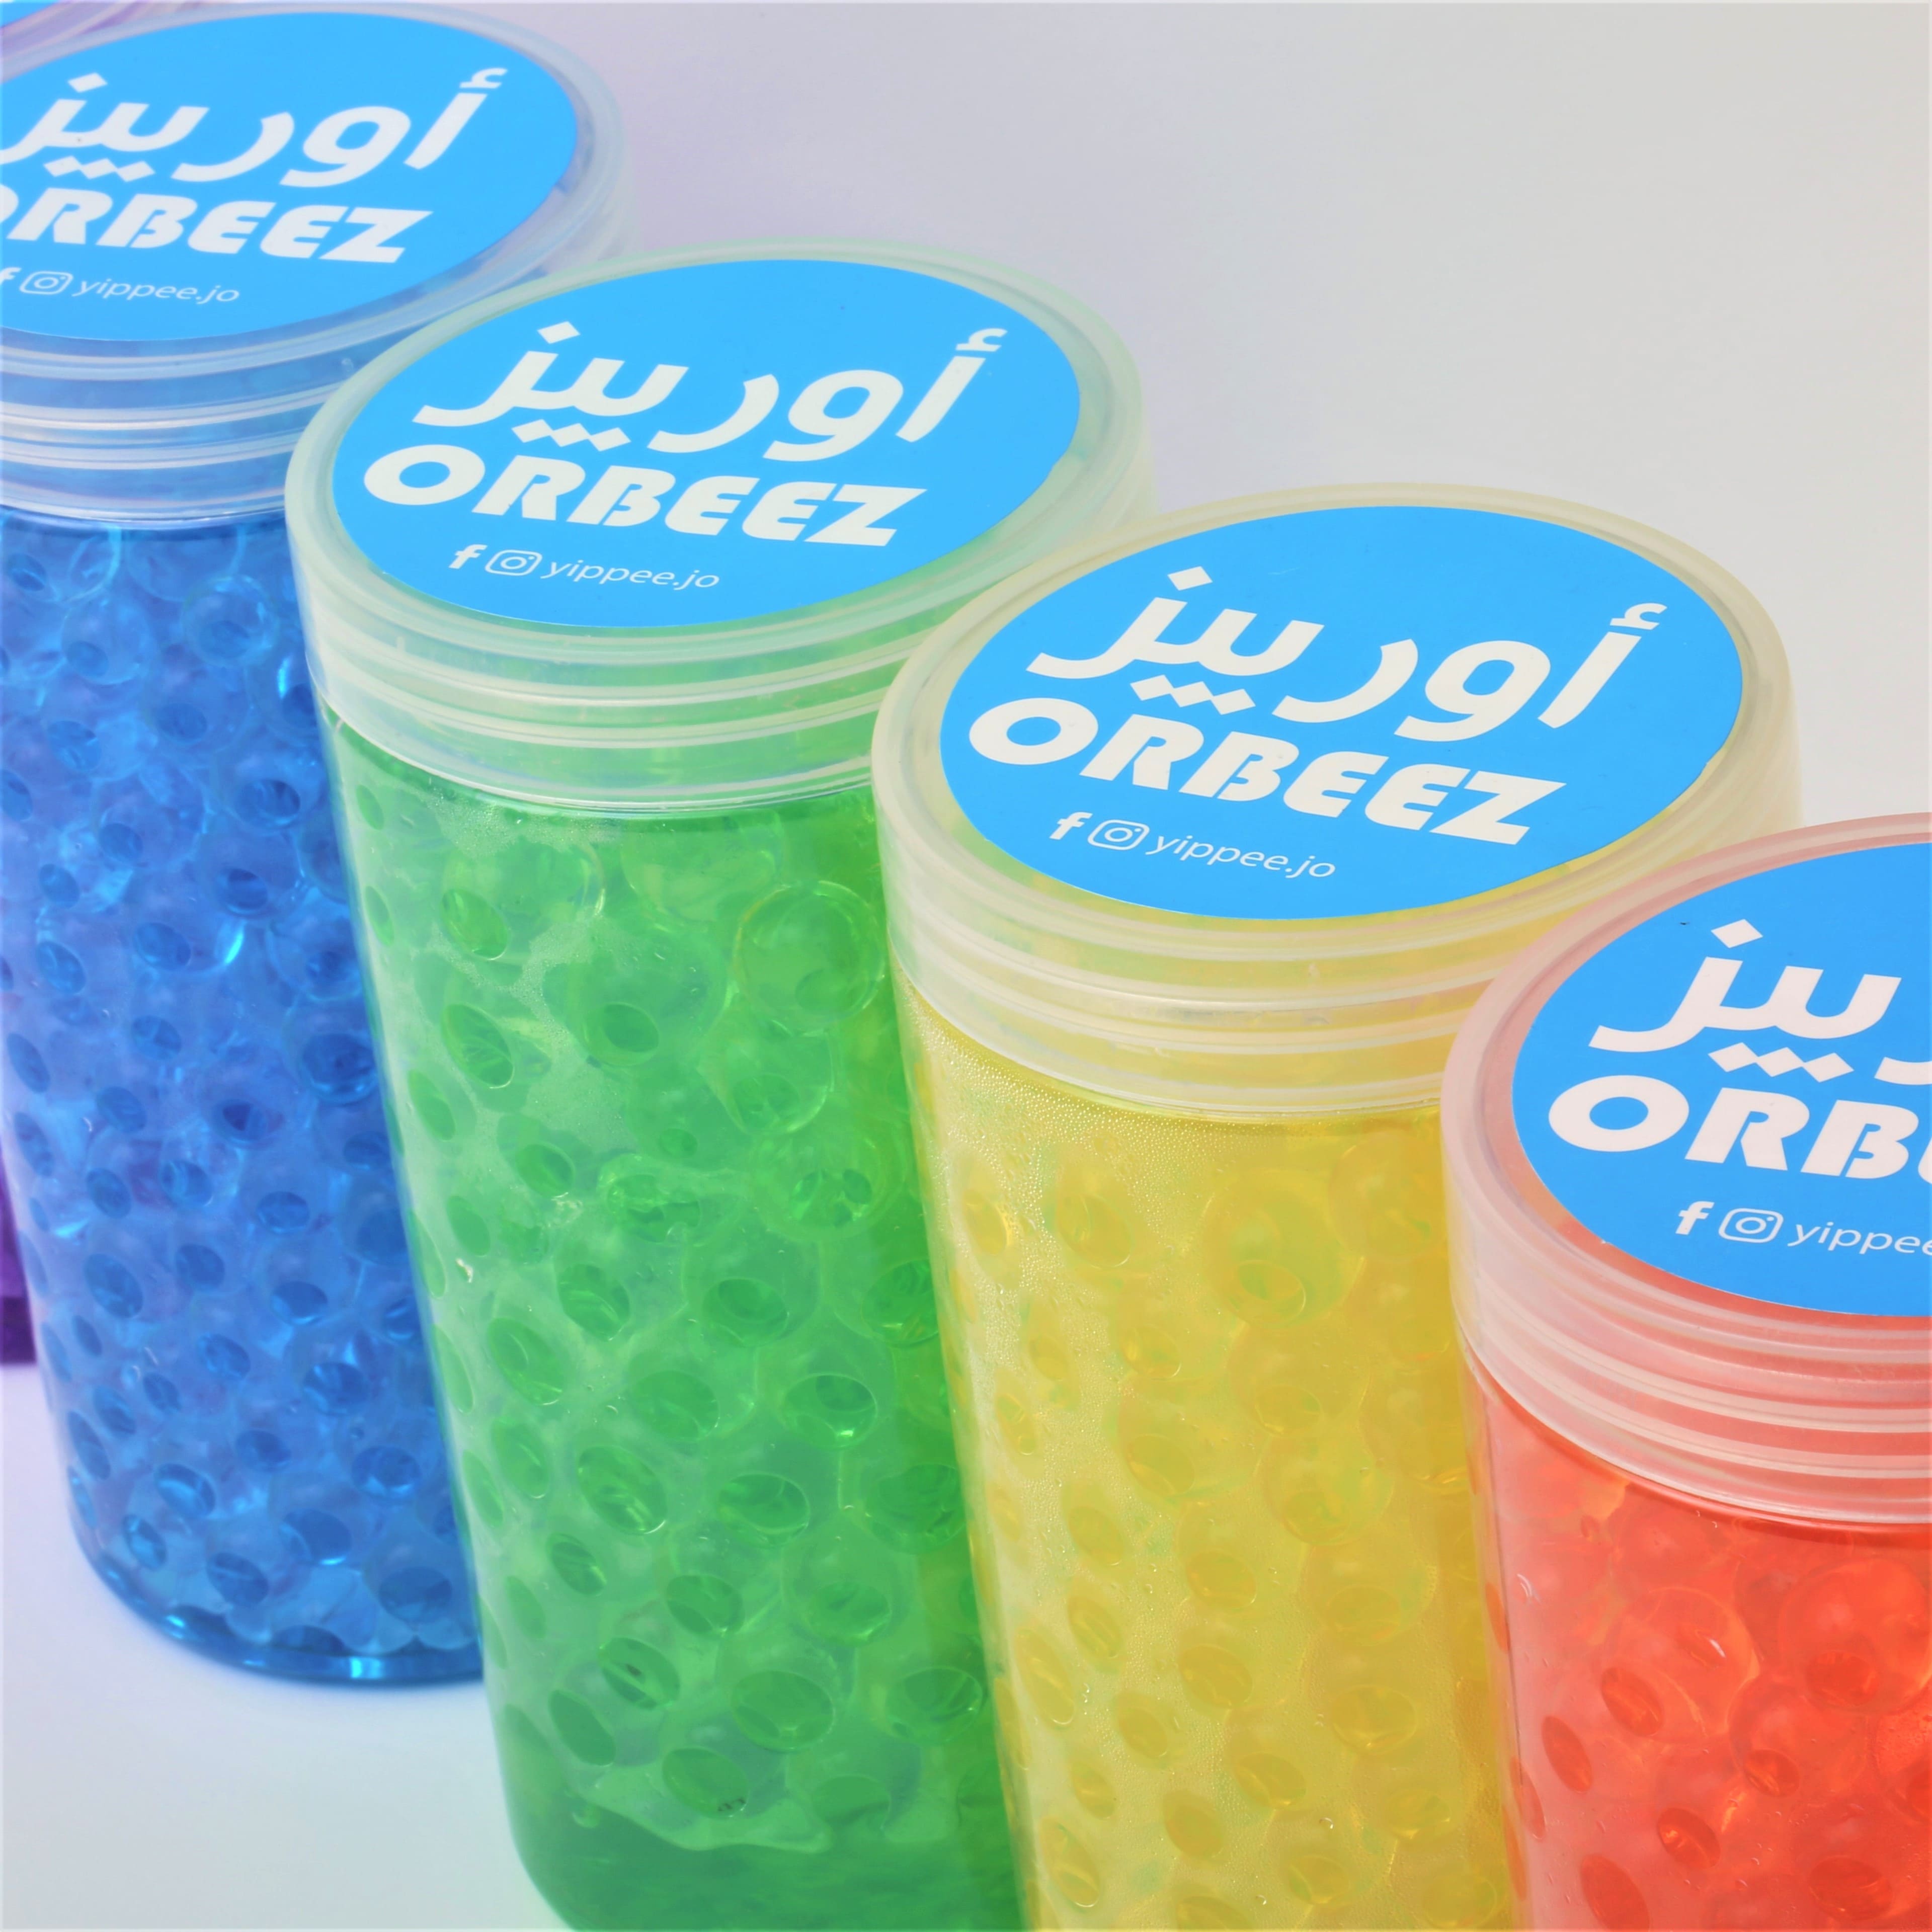 YIPPEE! Sensory Colored Orbeez - Green